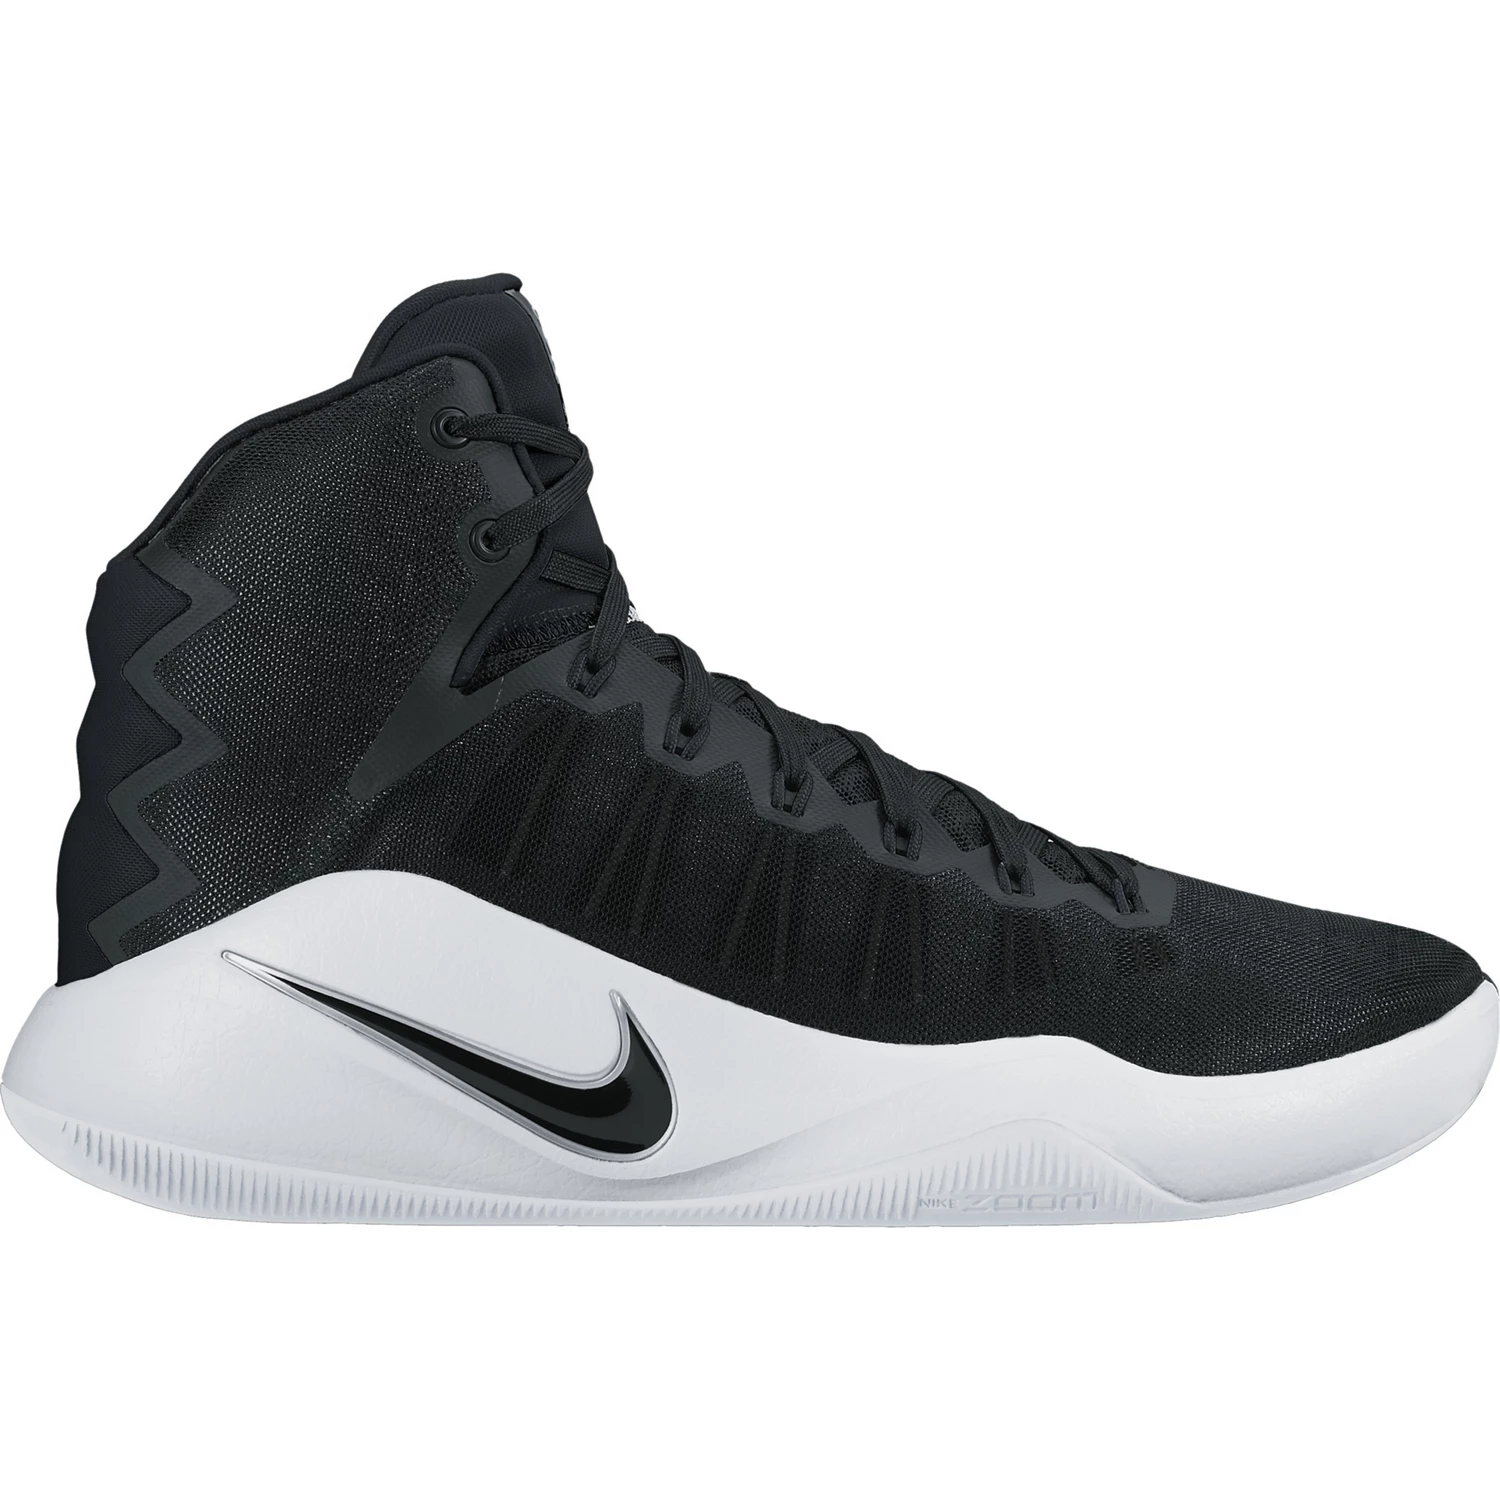 Cheap basketball shoes under 60 dollars 